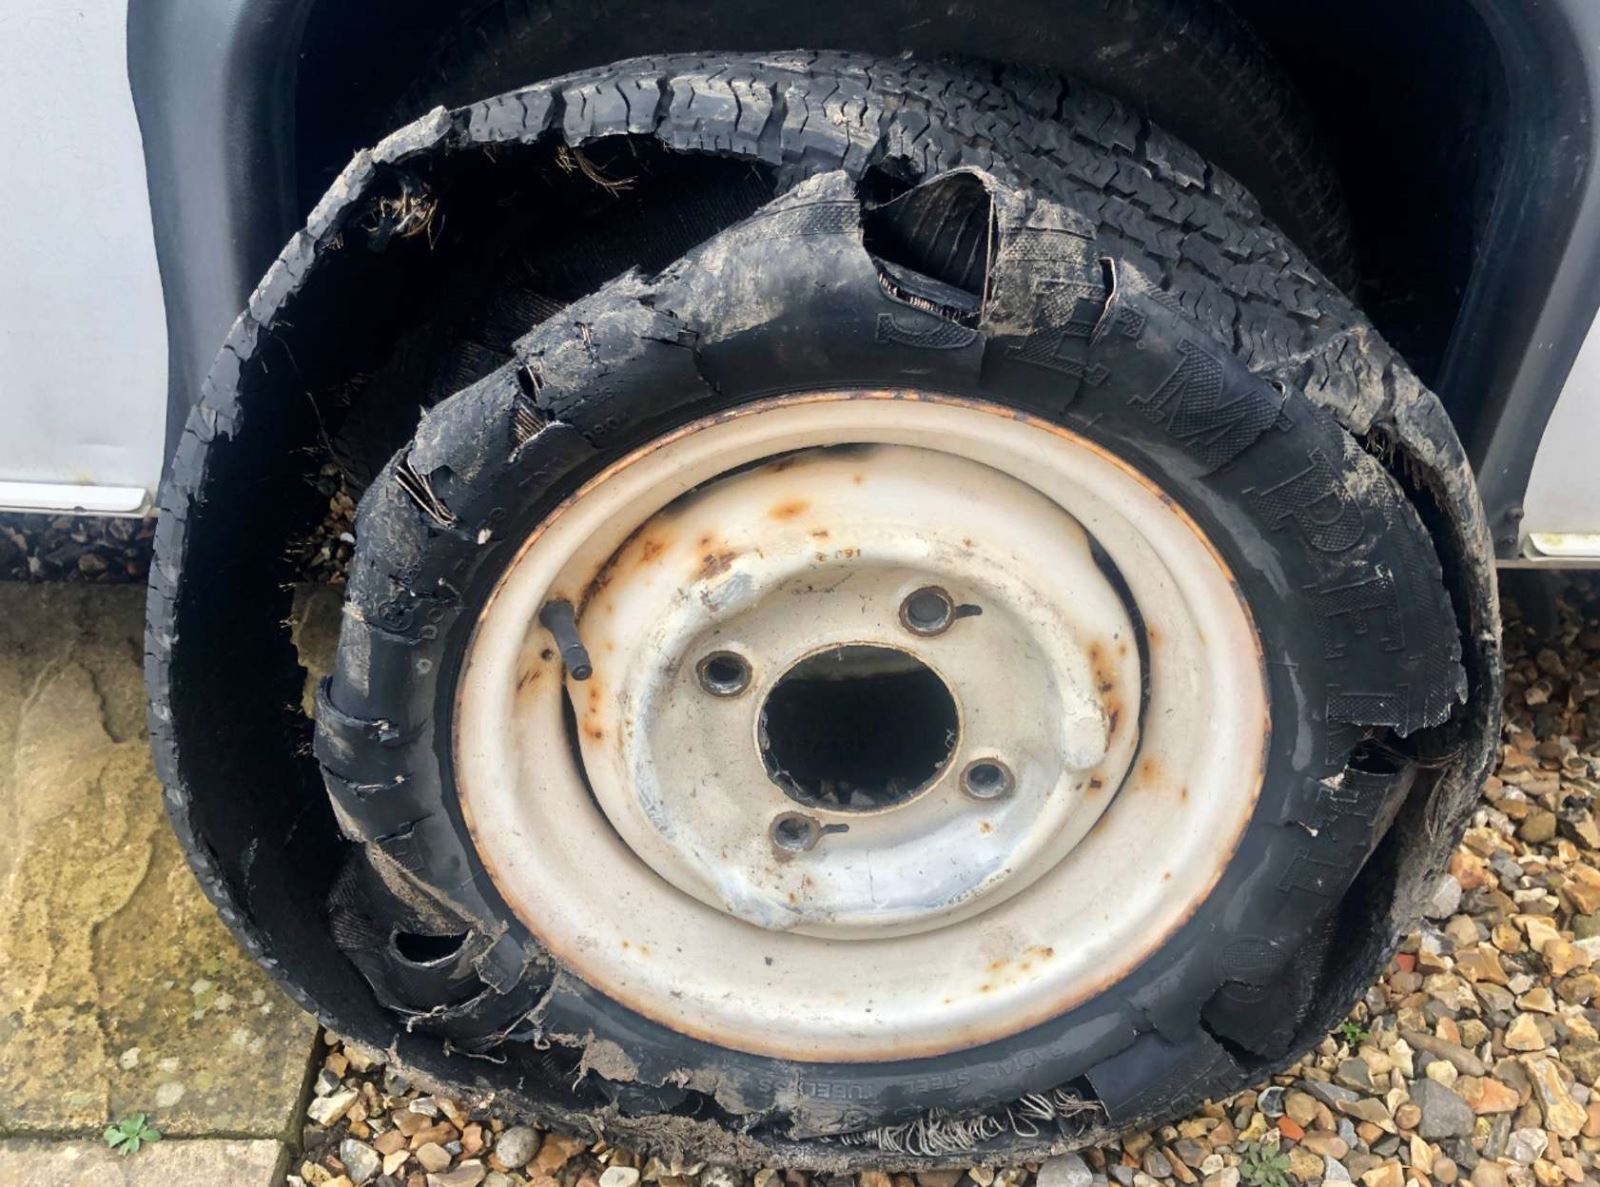 A destroyed tyre